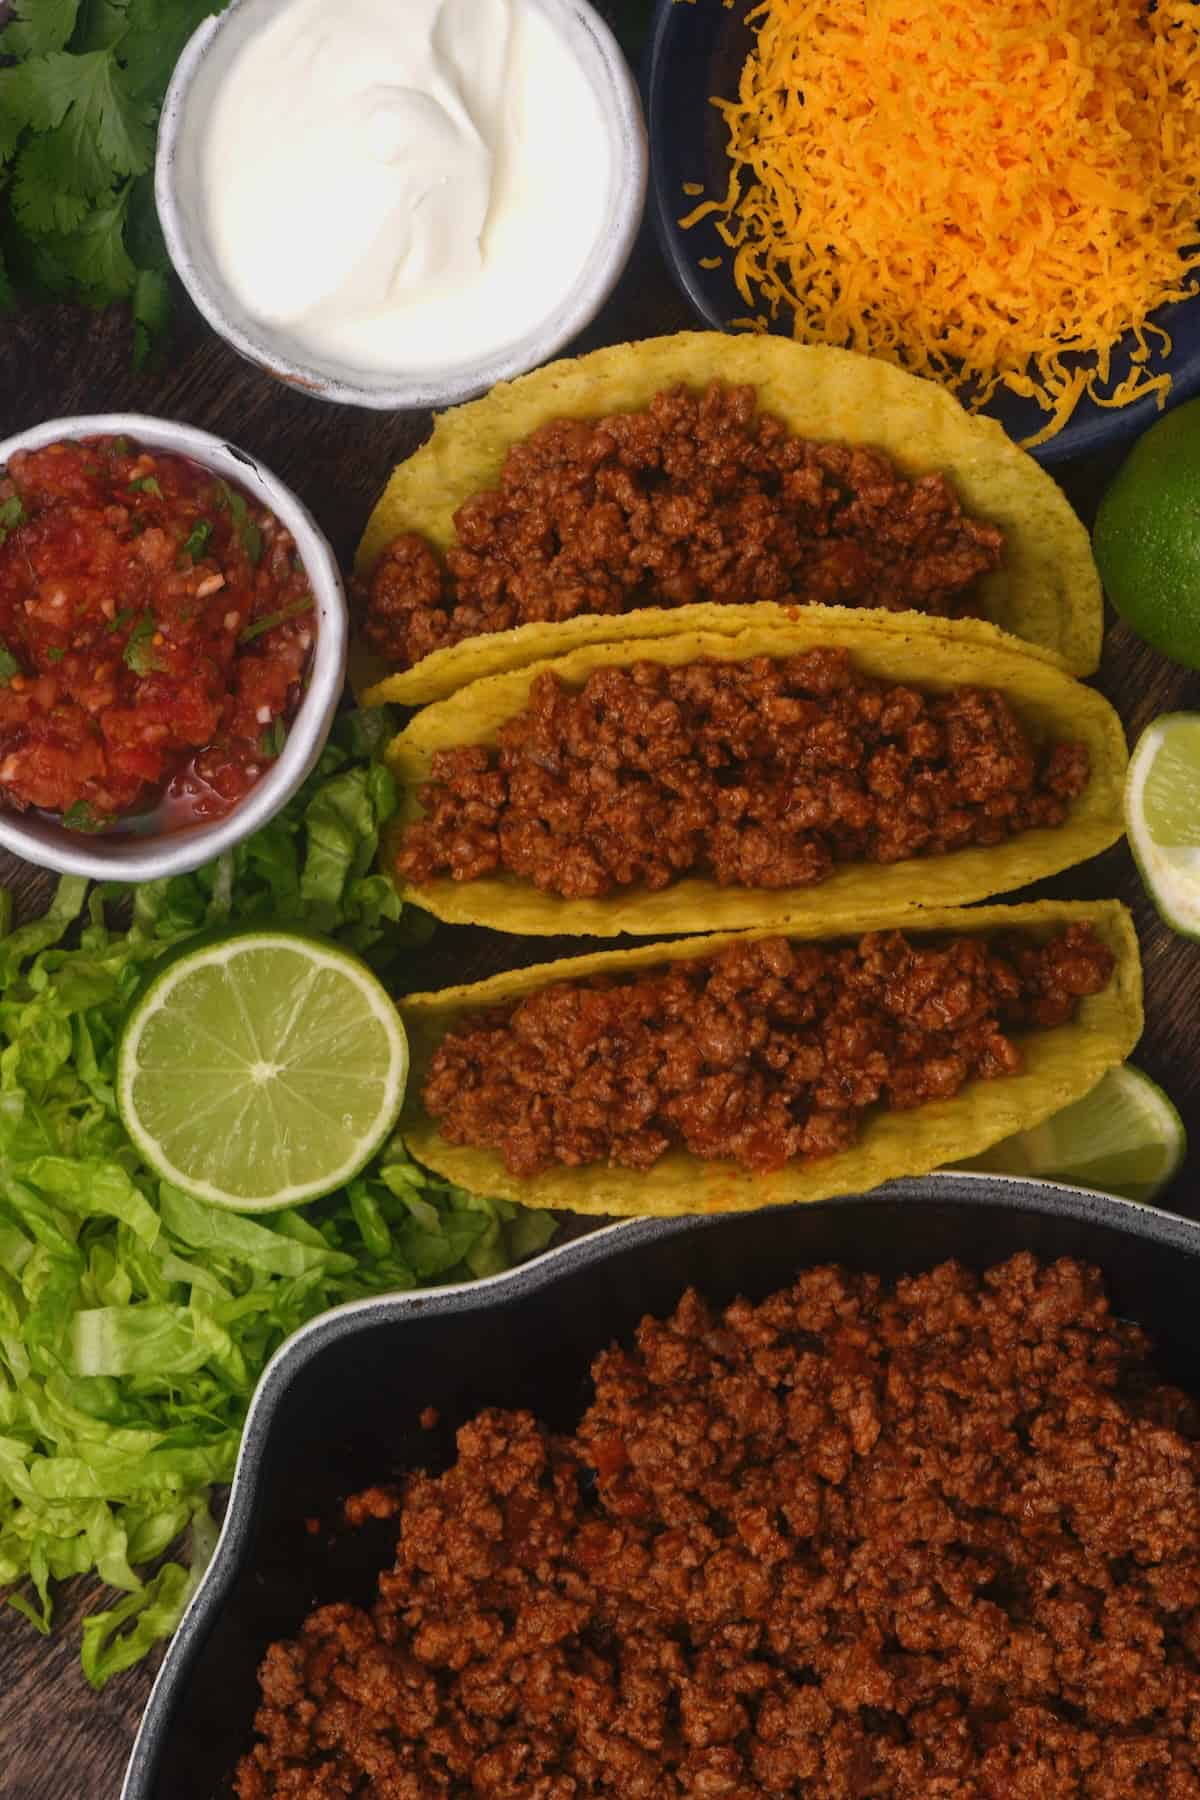 Assembling ground beef tacos with toppings